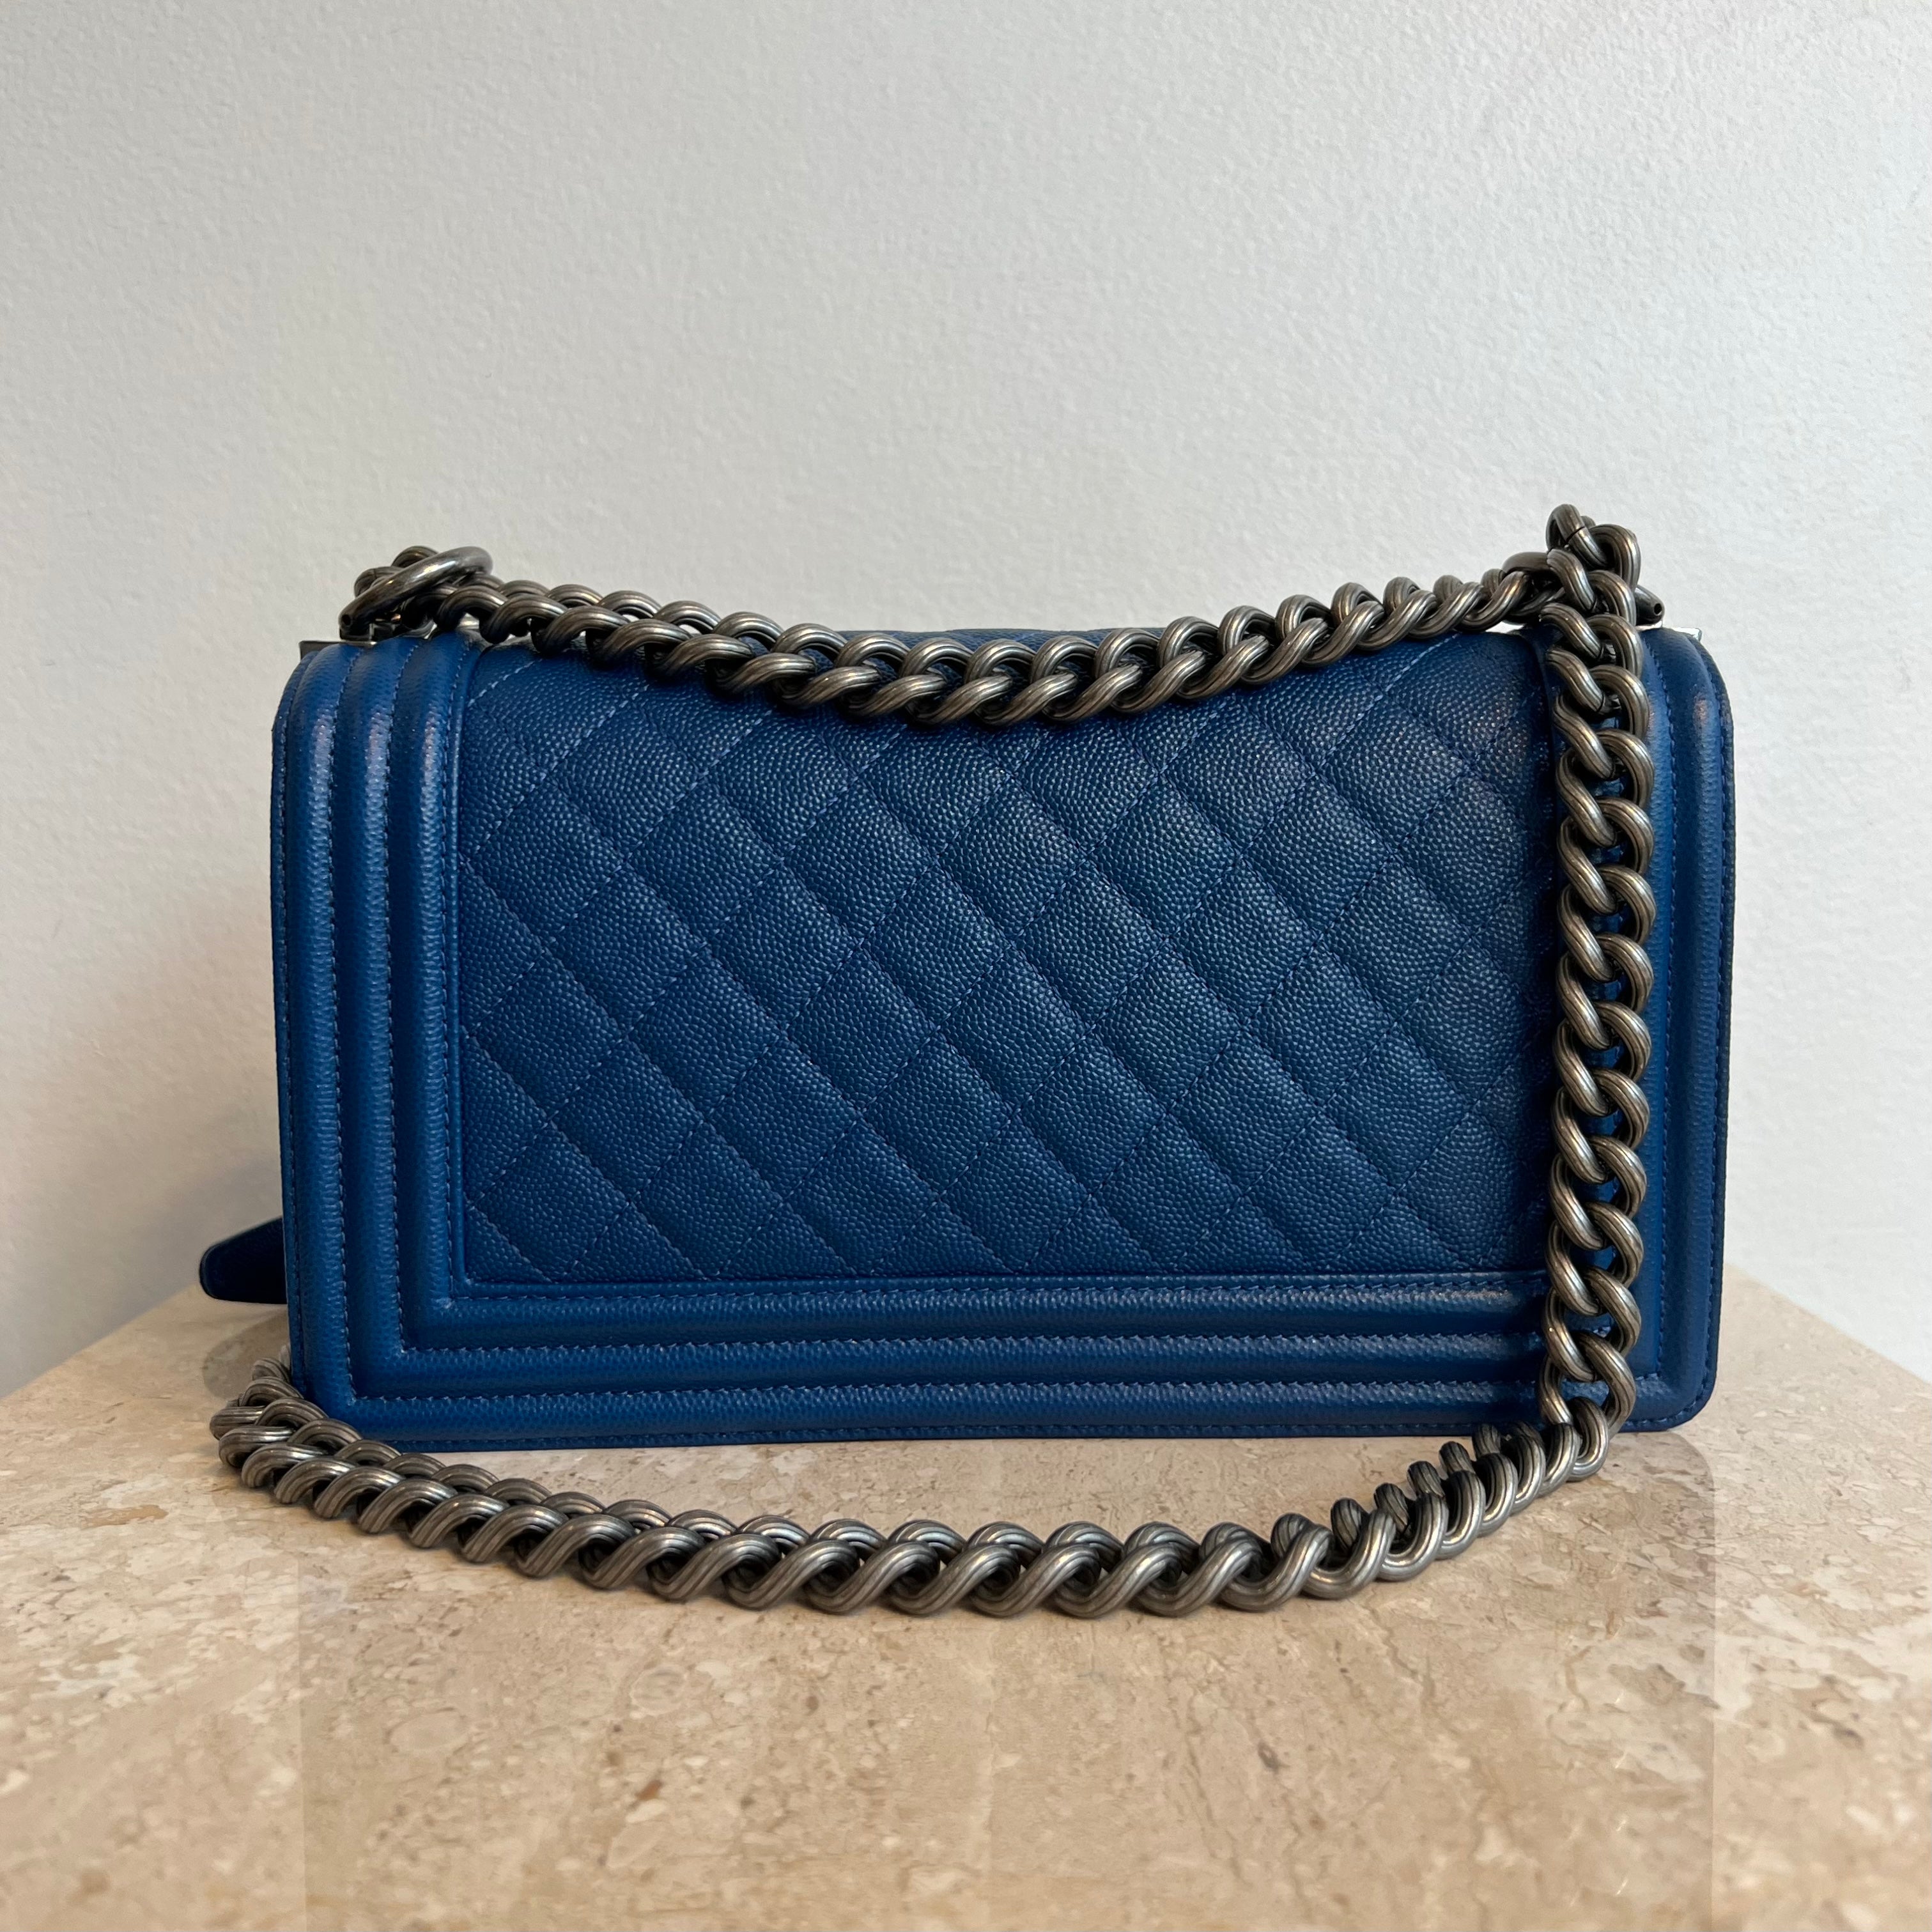 Chanel Navy Blue Quilted Leather Large Boy Flap Bag Chanel  TLC